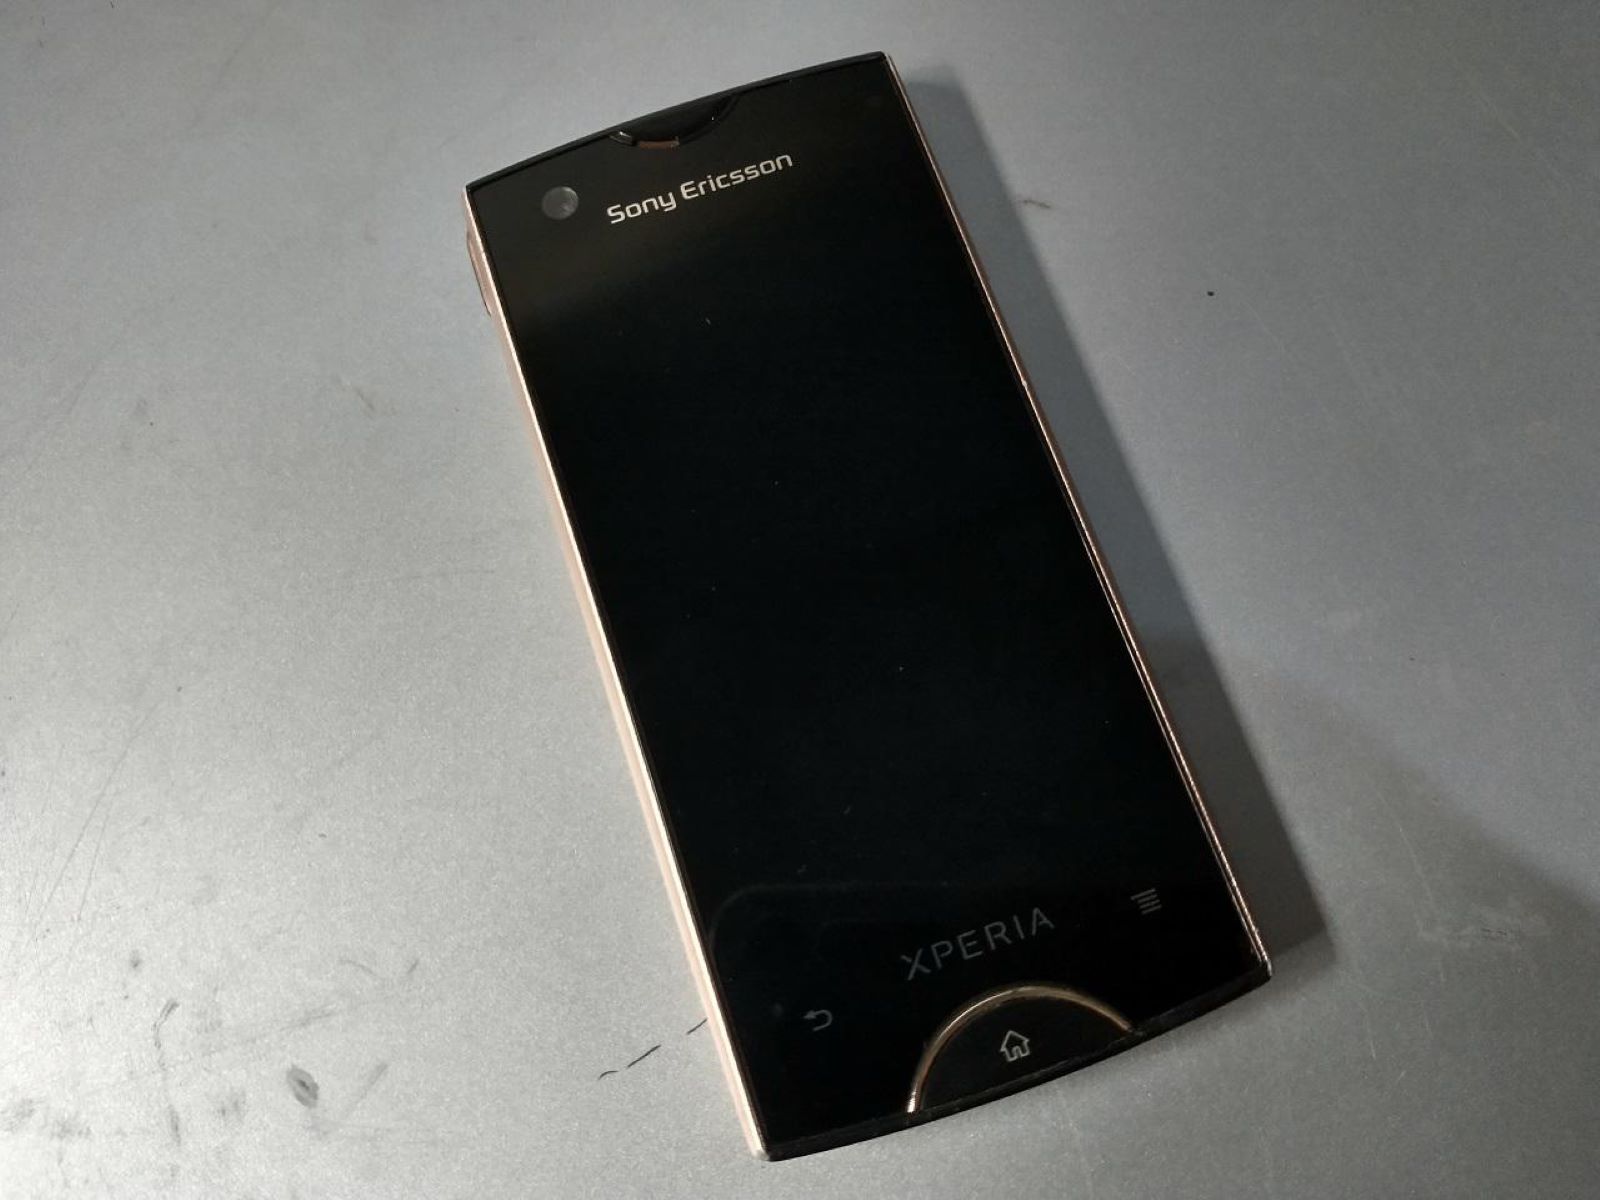 Updating Sony Ericsson Xperia Ray: A Step-by-Step Guide